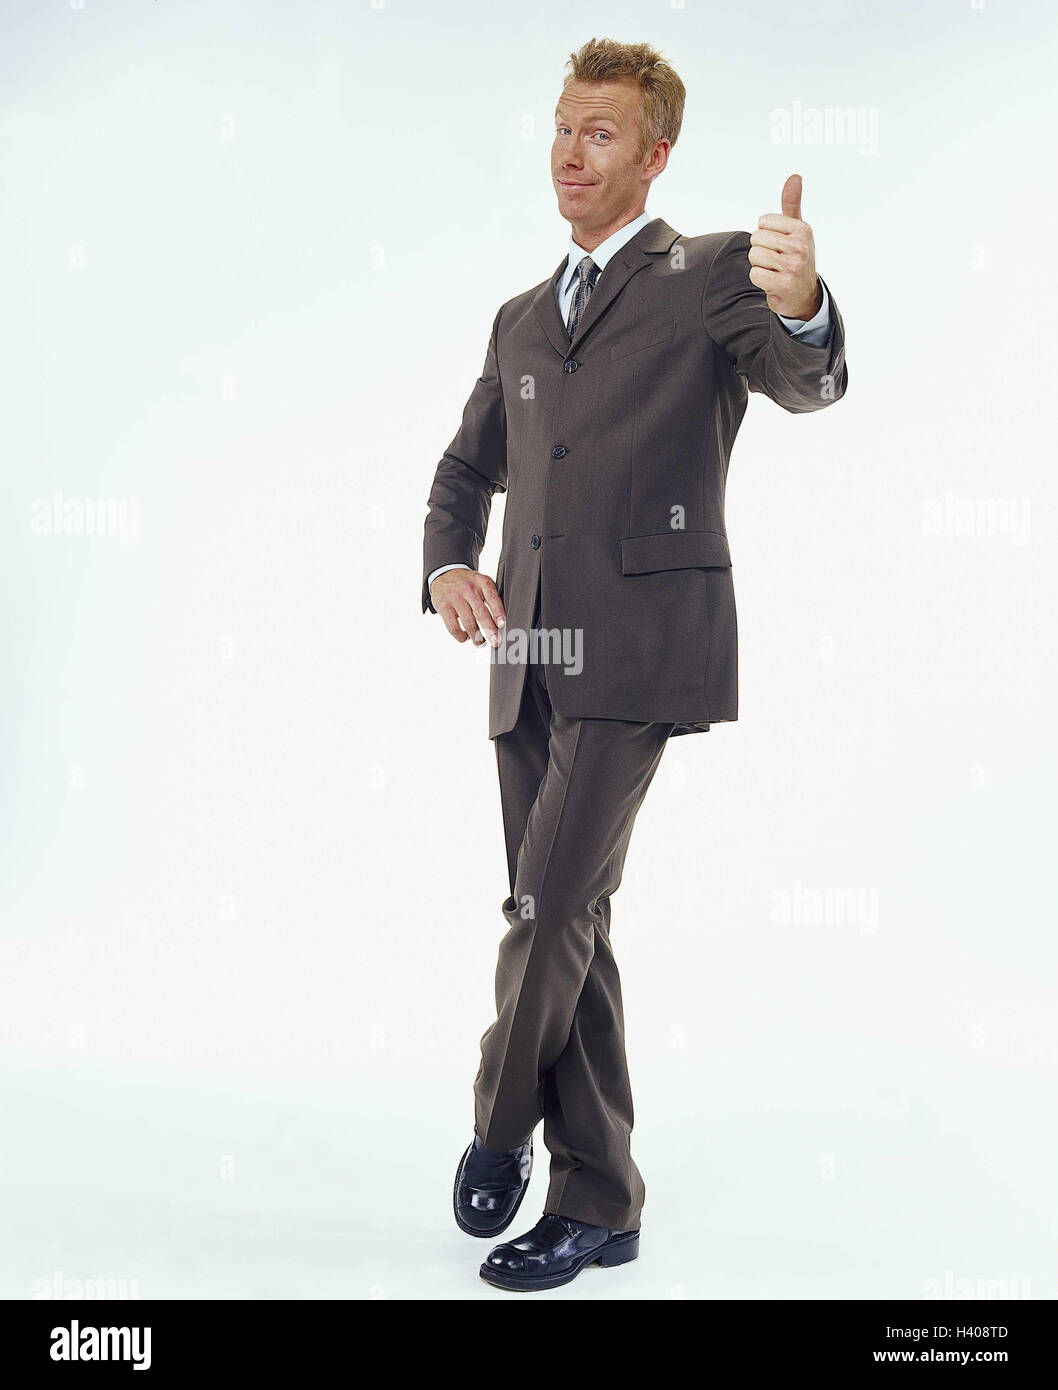 Man, young, suit, gesture, pollex, high, Men, manager, businessman, gesture, O.K., positively, perfectly, in order, well, okay, studio, cut out, Stock Photo